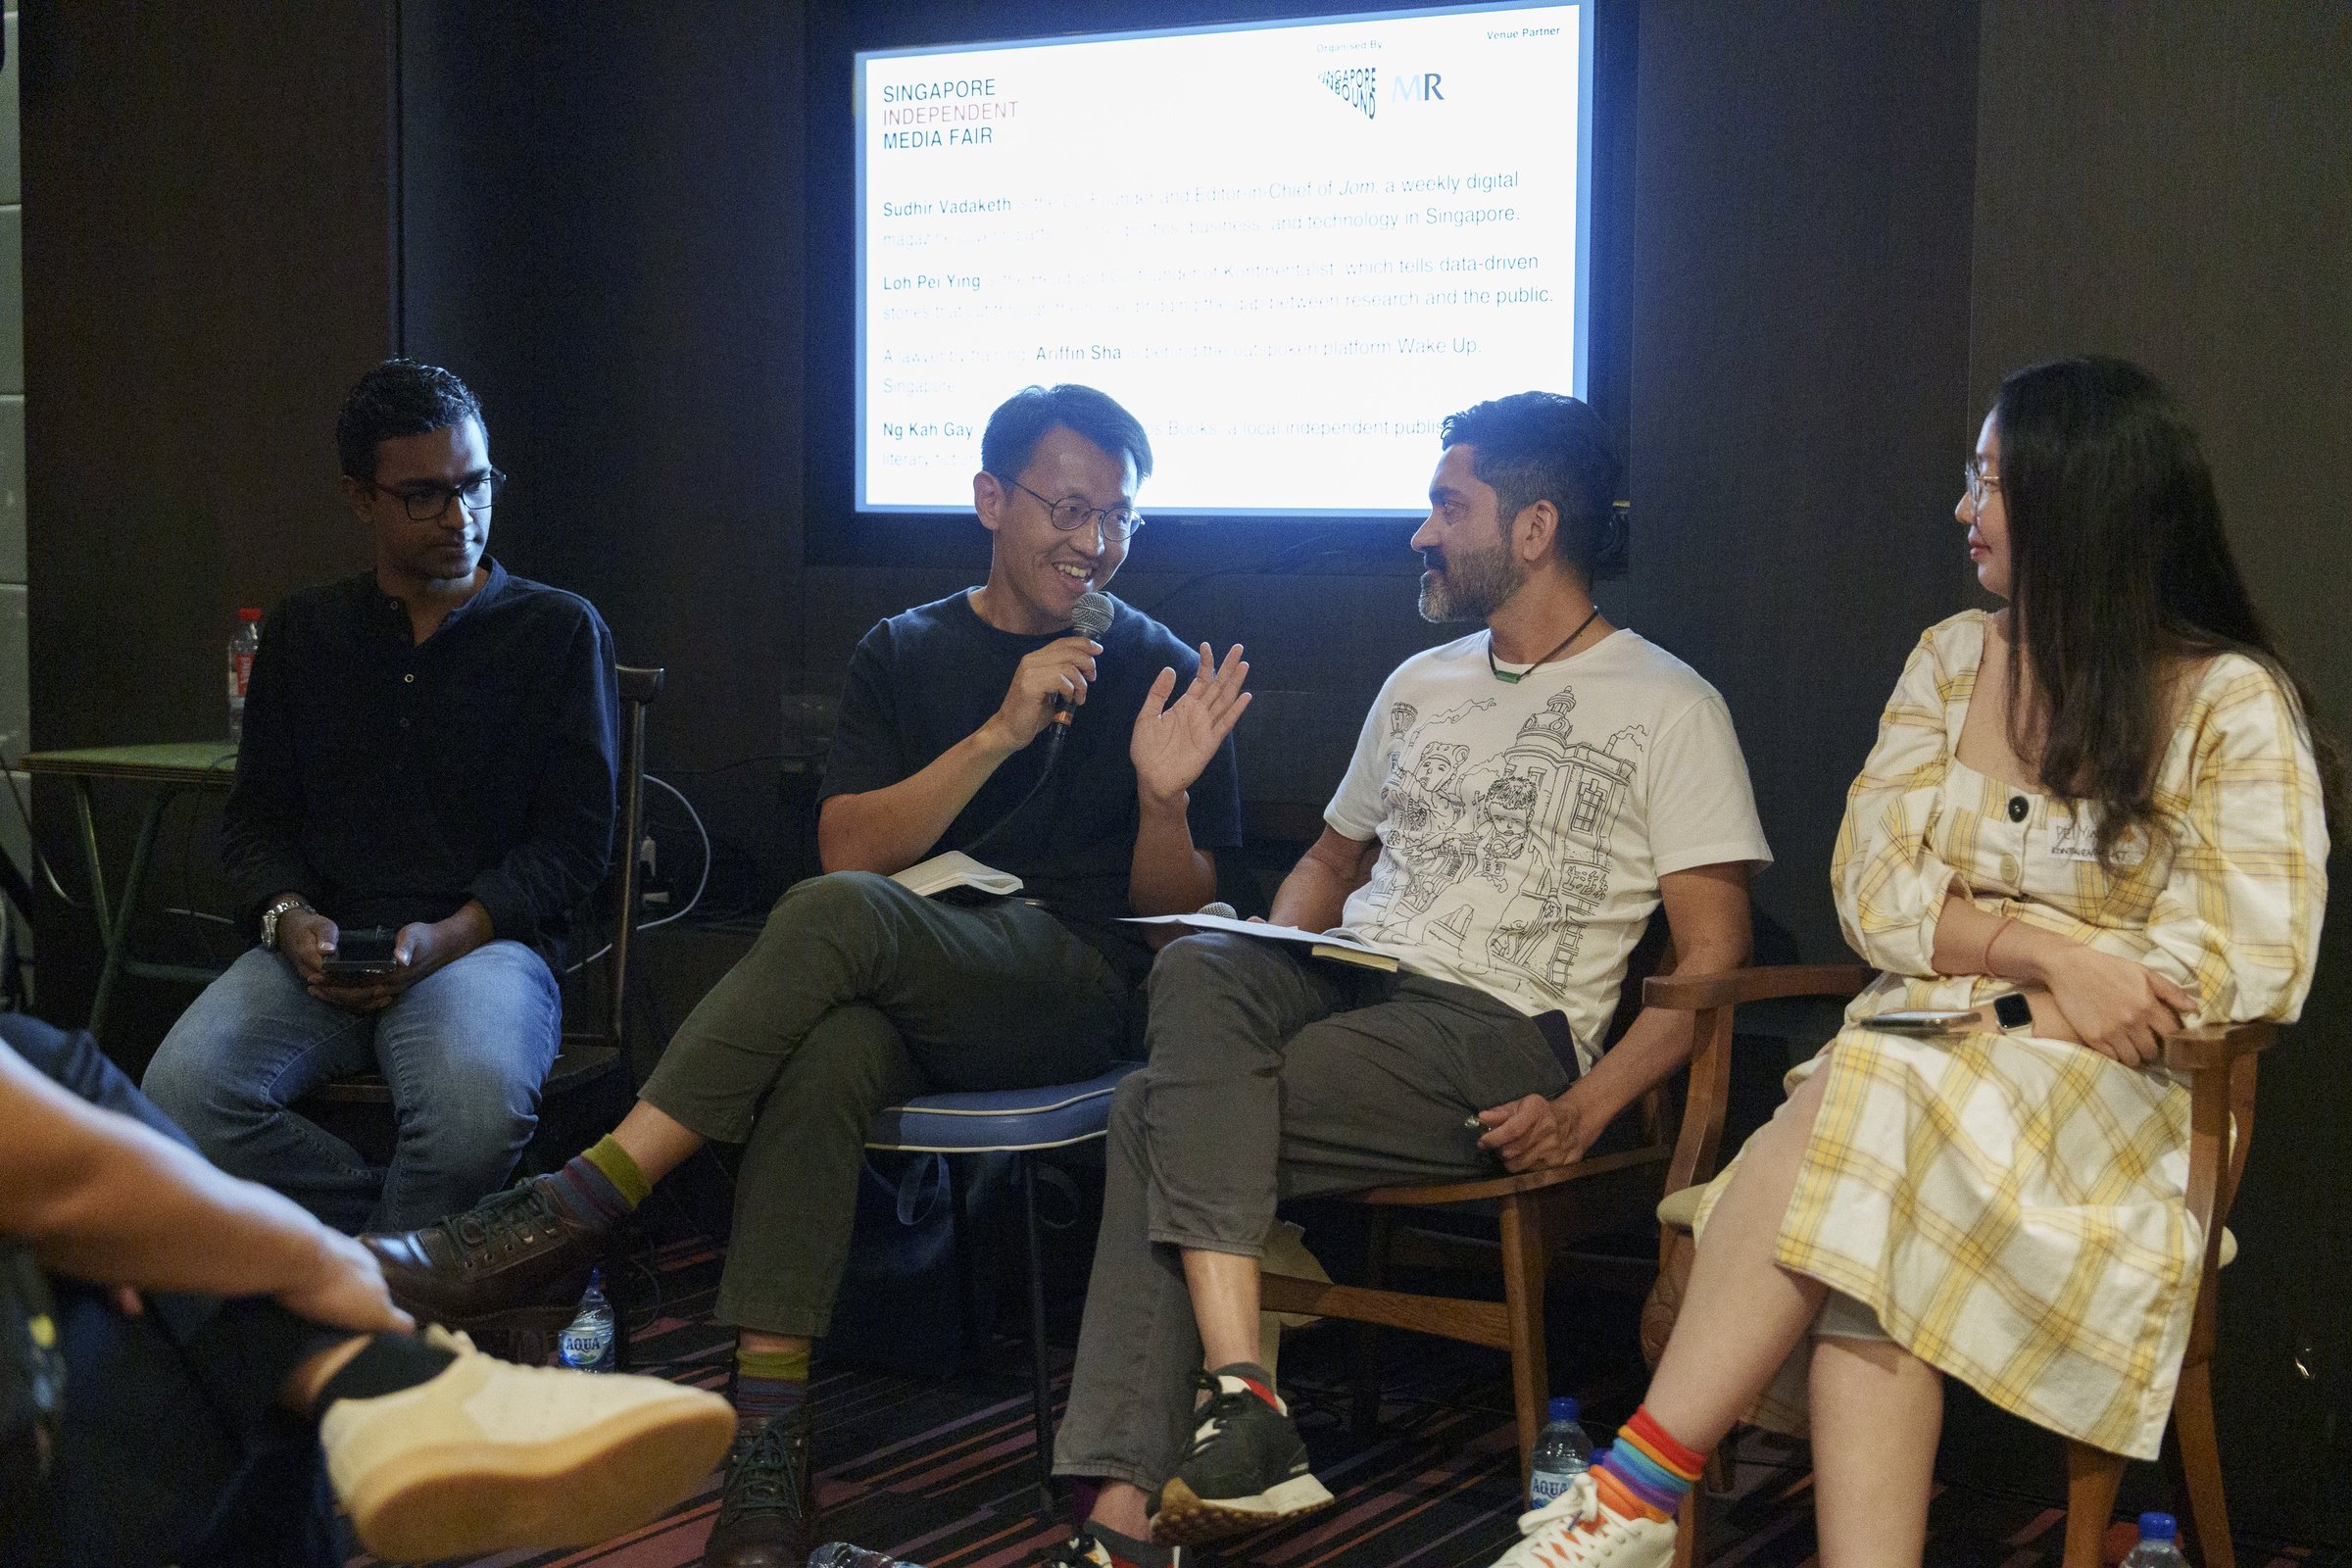  Open Forum featuring Ariffin Shah, Ng Kah Gay, Sudhir Vadaketh and Loh Pei Ying, Singapore Independent Media Fair, July 2023, Photo by Nicholas Yeo 